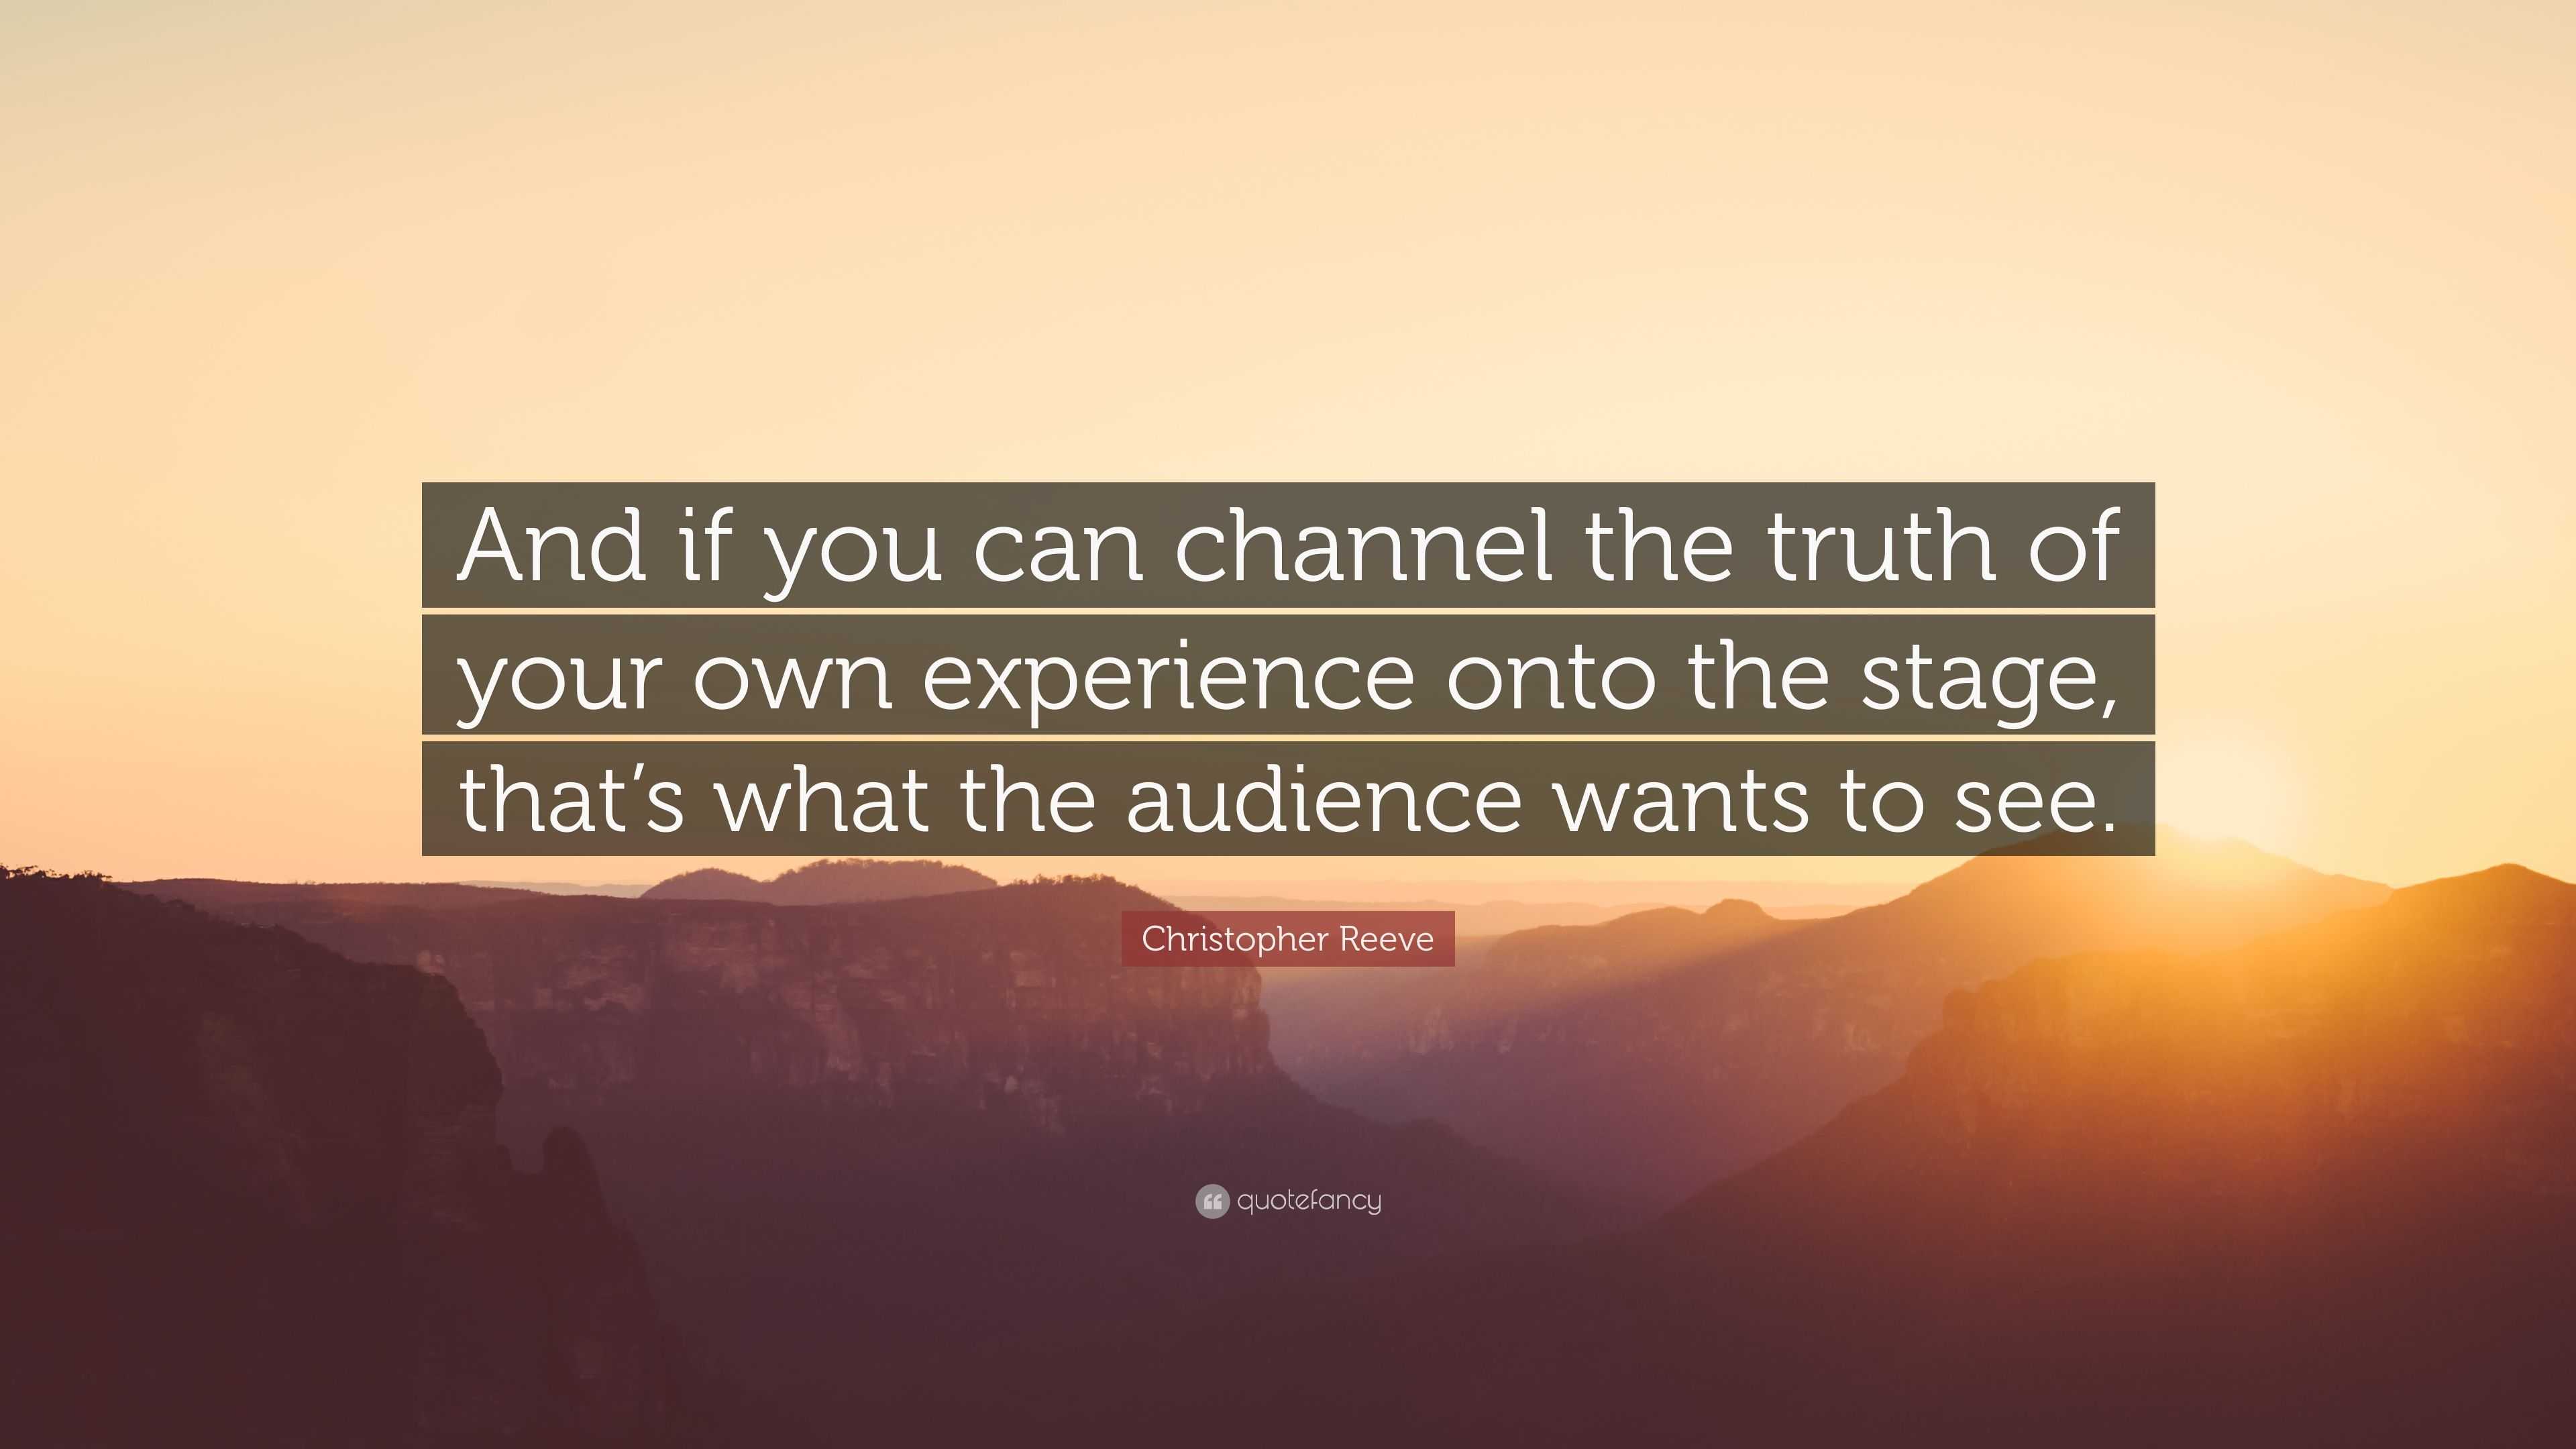 Christopher Reeve Quote: “And if you can channel the truth of your own ...